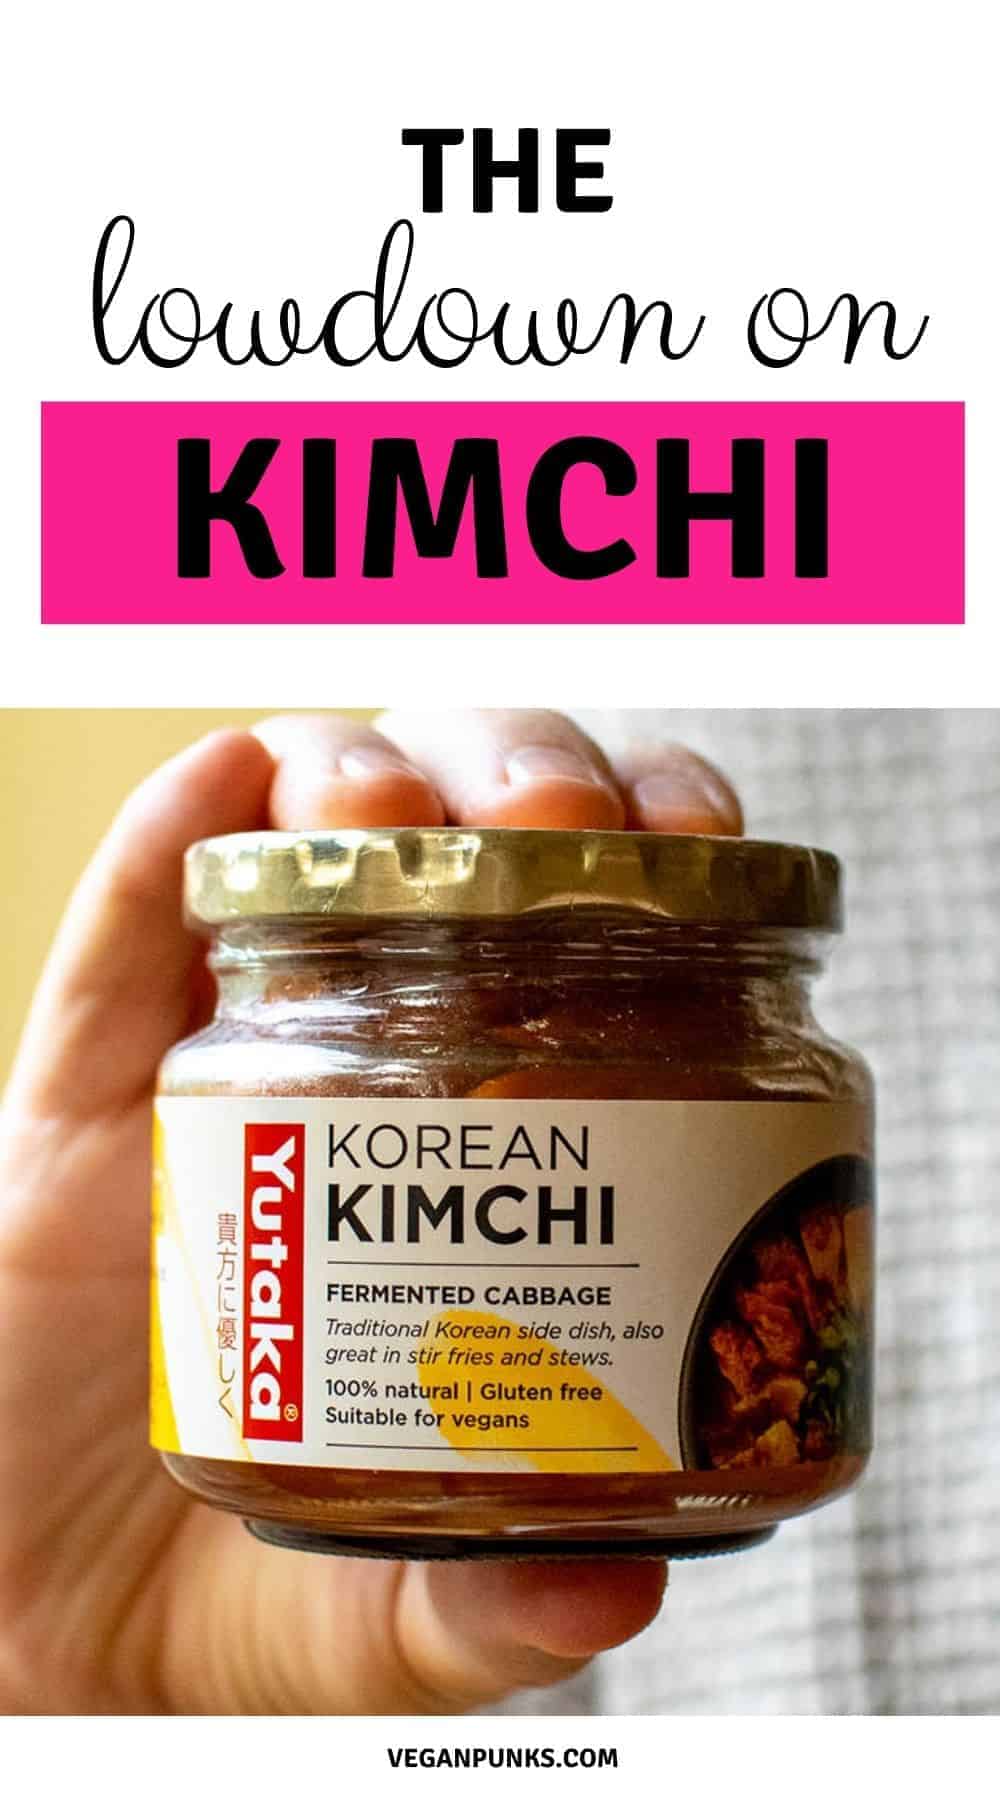 An image of a jar of kimchi being held ip in a hand with a title above it 'The lowdown on kimchi'